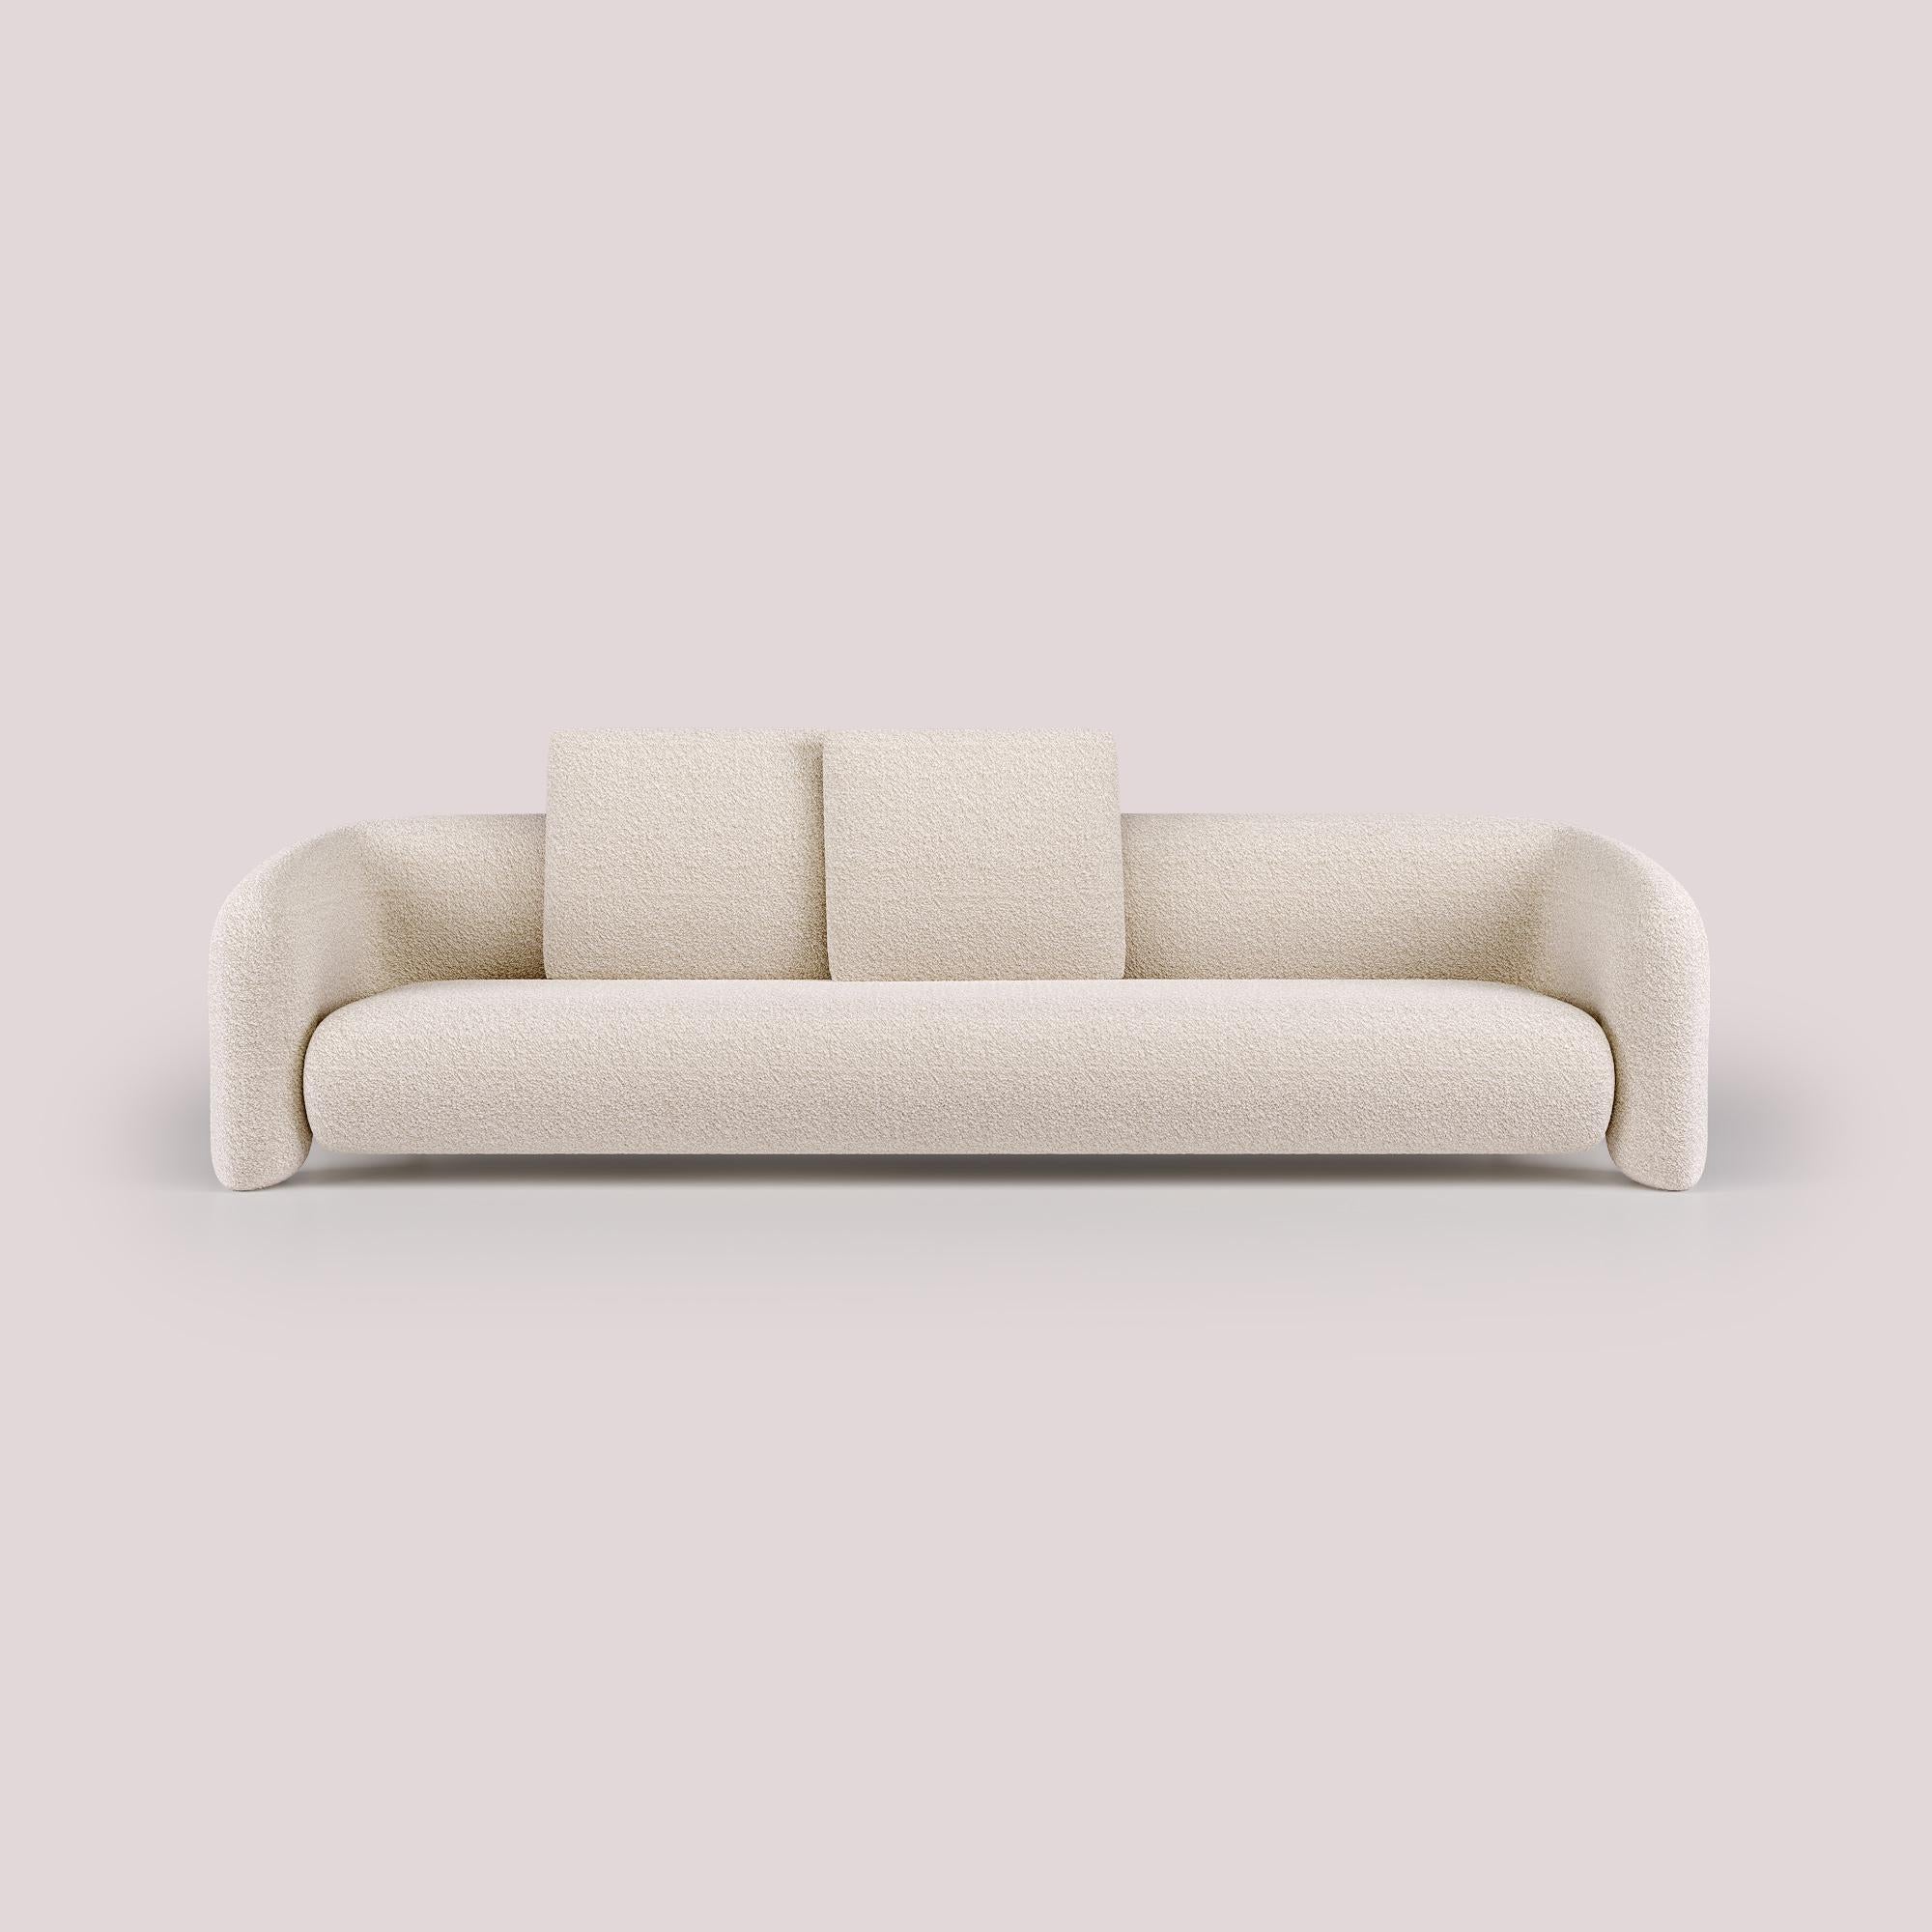 With its sleek, modern design, this version of the Bold Sofa brings a new level of comfort, providing ample space for pure relaxation. The clean lines and straightforward form, complemented by its open arms, enhance the feeling of openness. Drawing